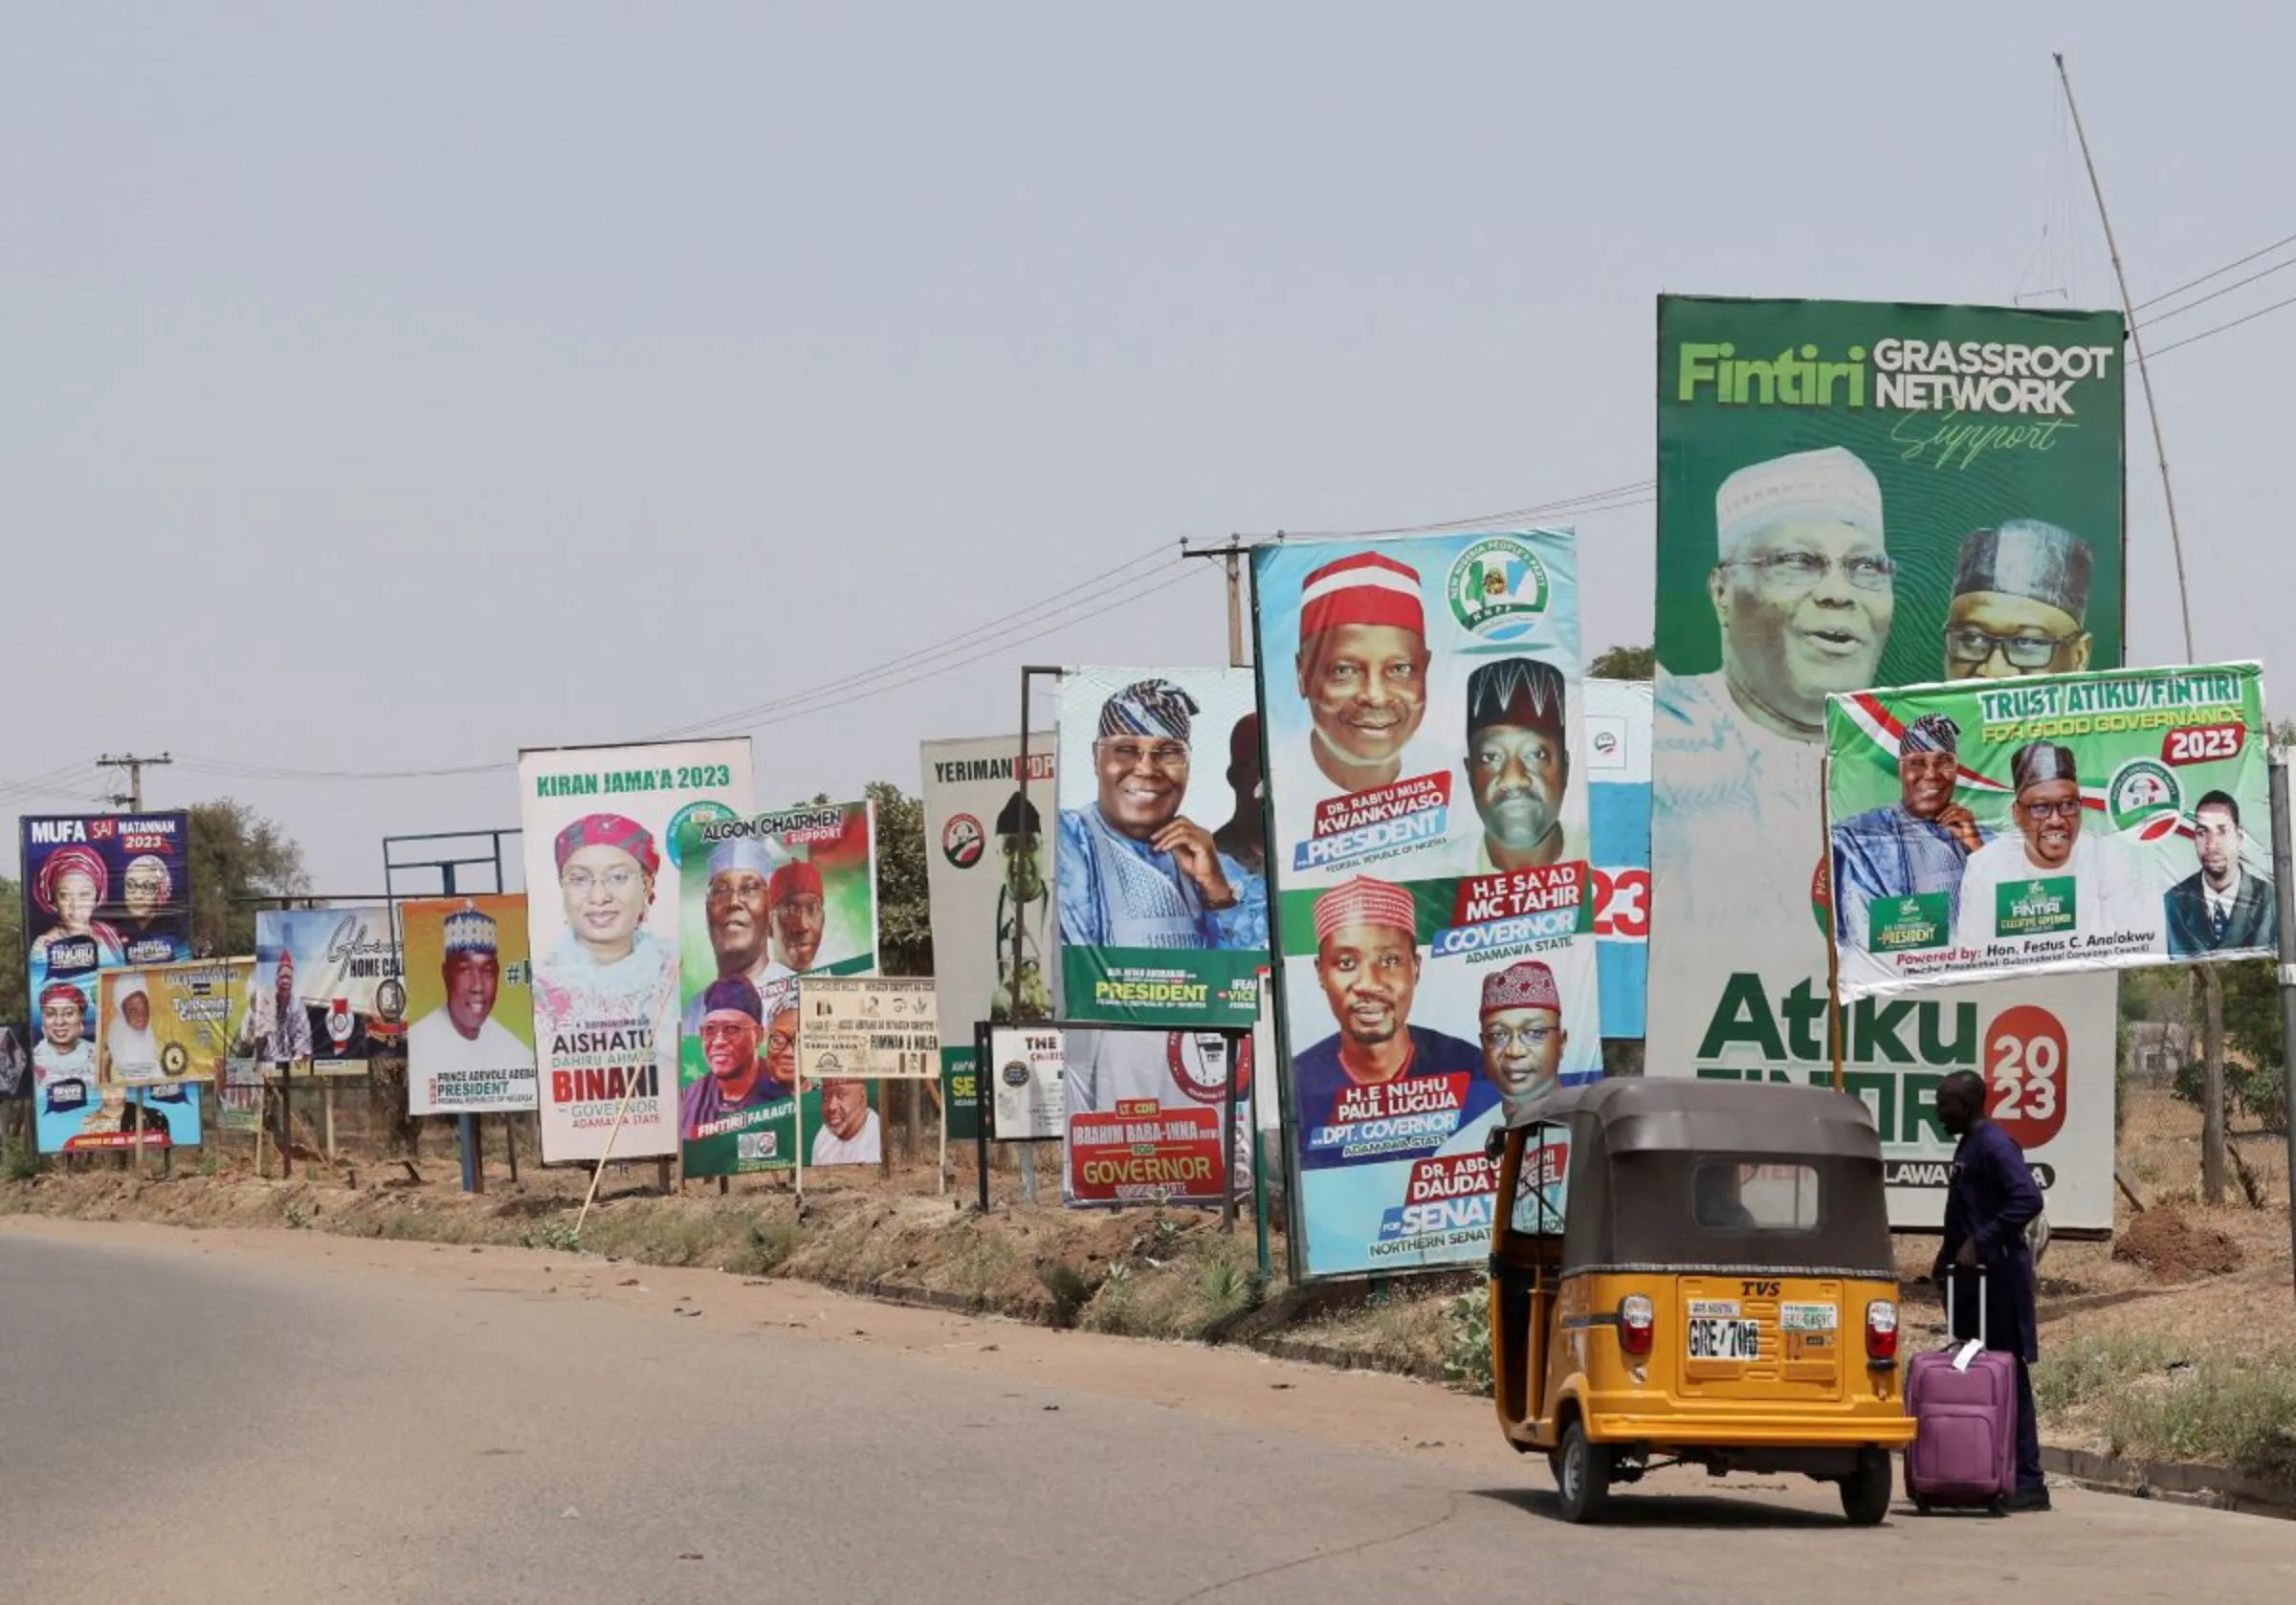 Electoral campaign posters are seen in Numan road, ahead of Nigeria's Presidential elections, in Yola, Nigeria, February 23, 2023 TPX IMAGES OF THE DAY